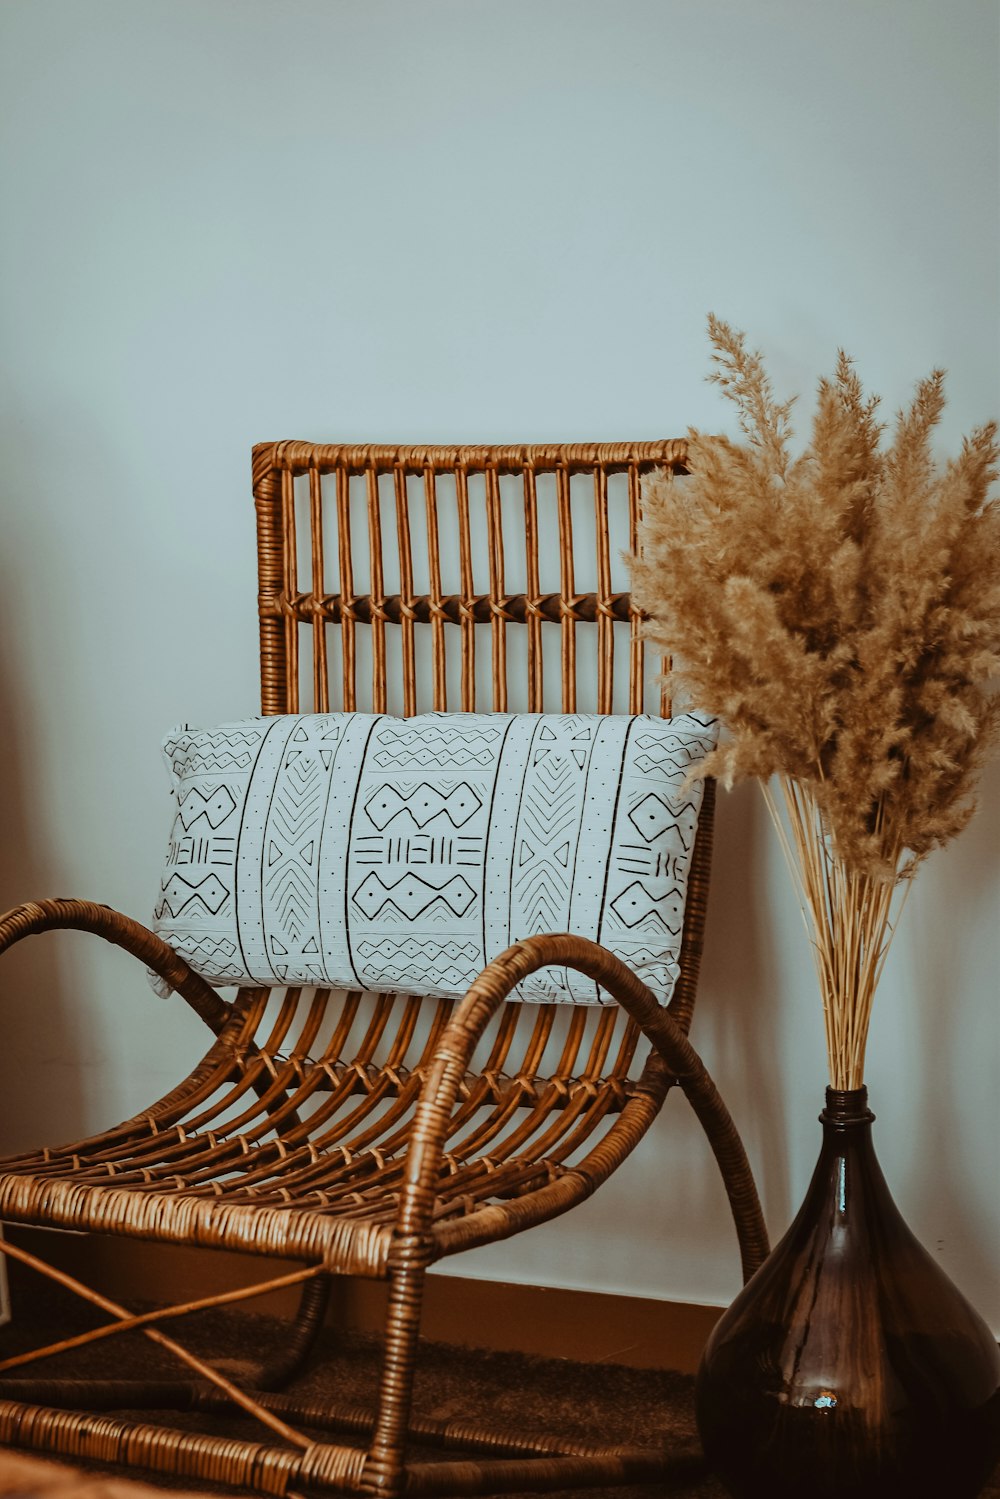 a wicker chair next to a vase with a plant in it